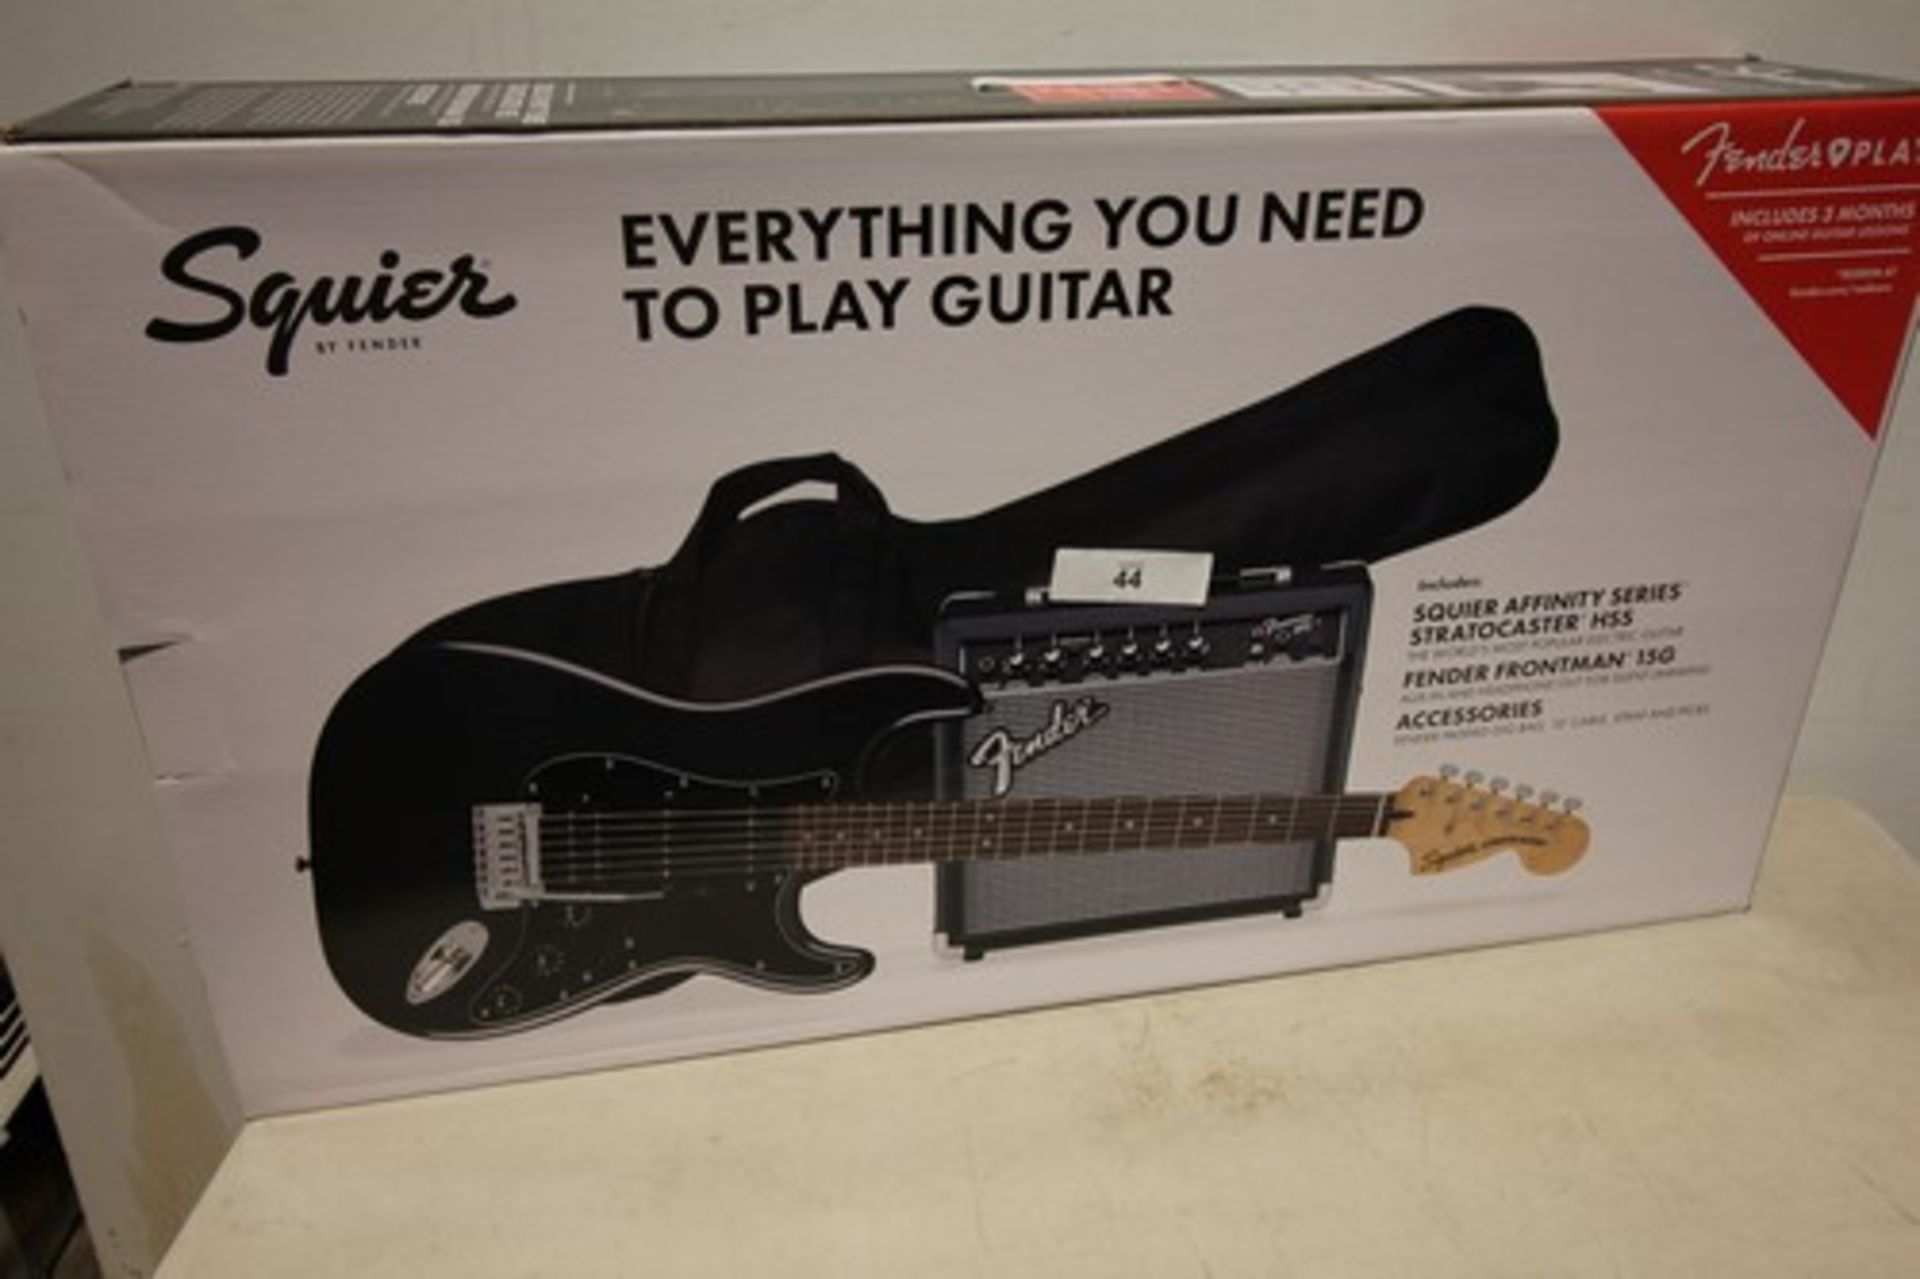 1 x Fender Squier Stratocaster guitar and amp kit, model 0372821469 - sealed new in box (ES3)